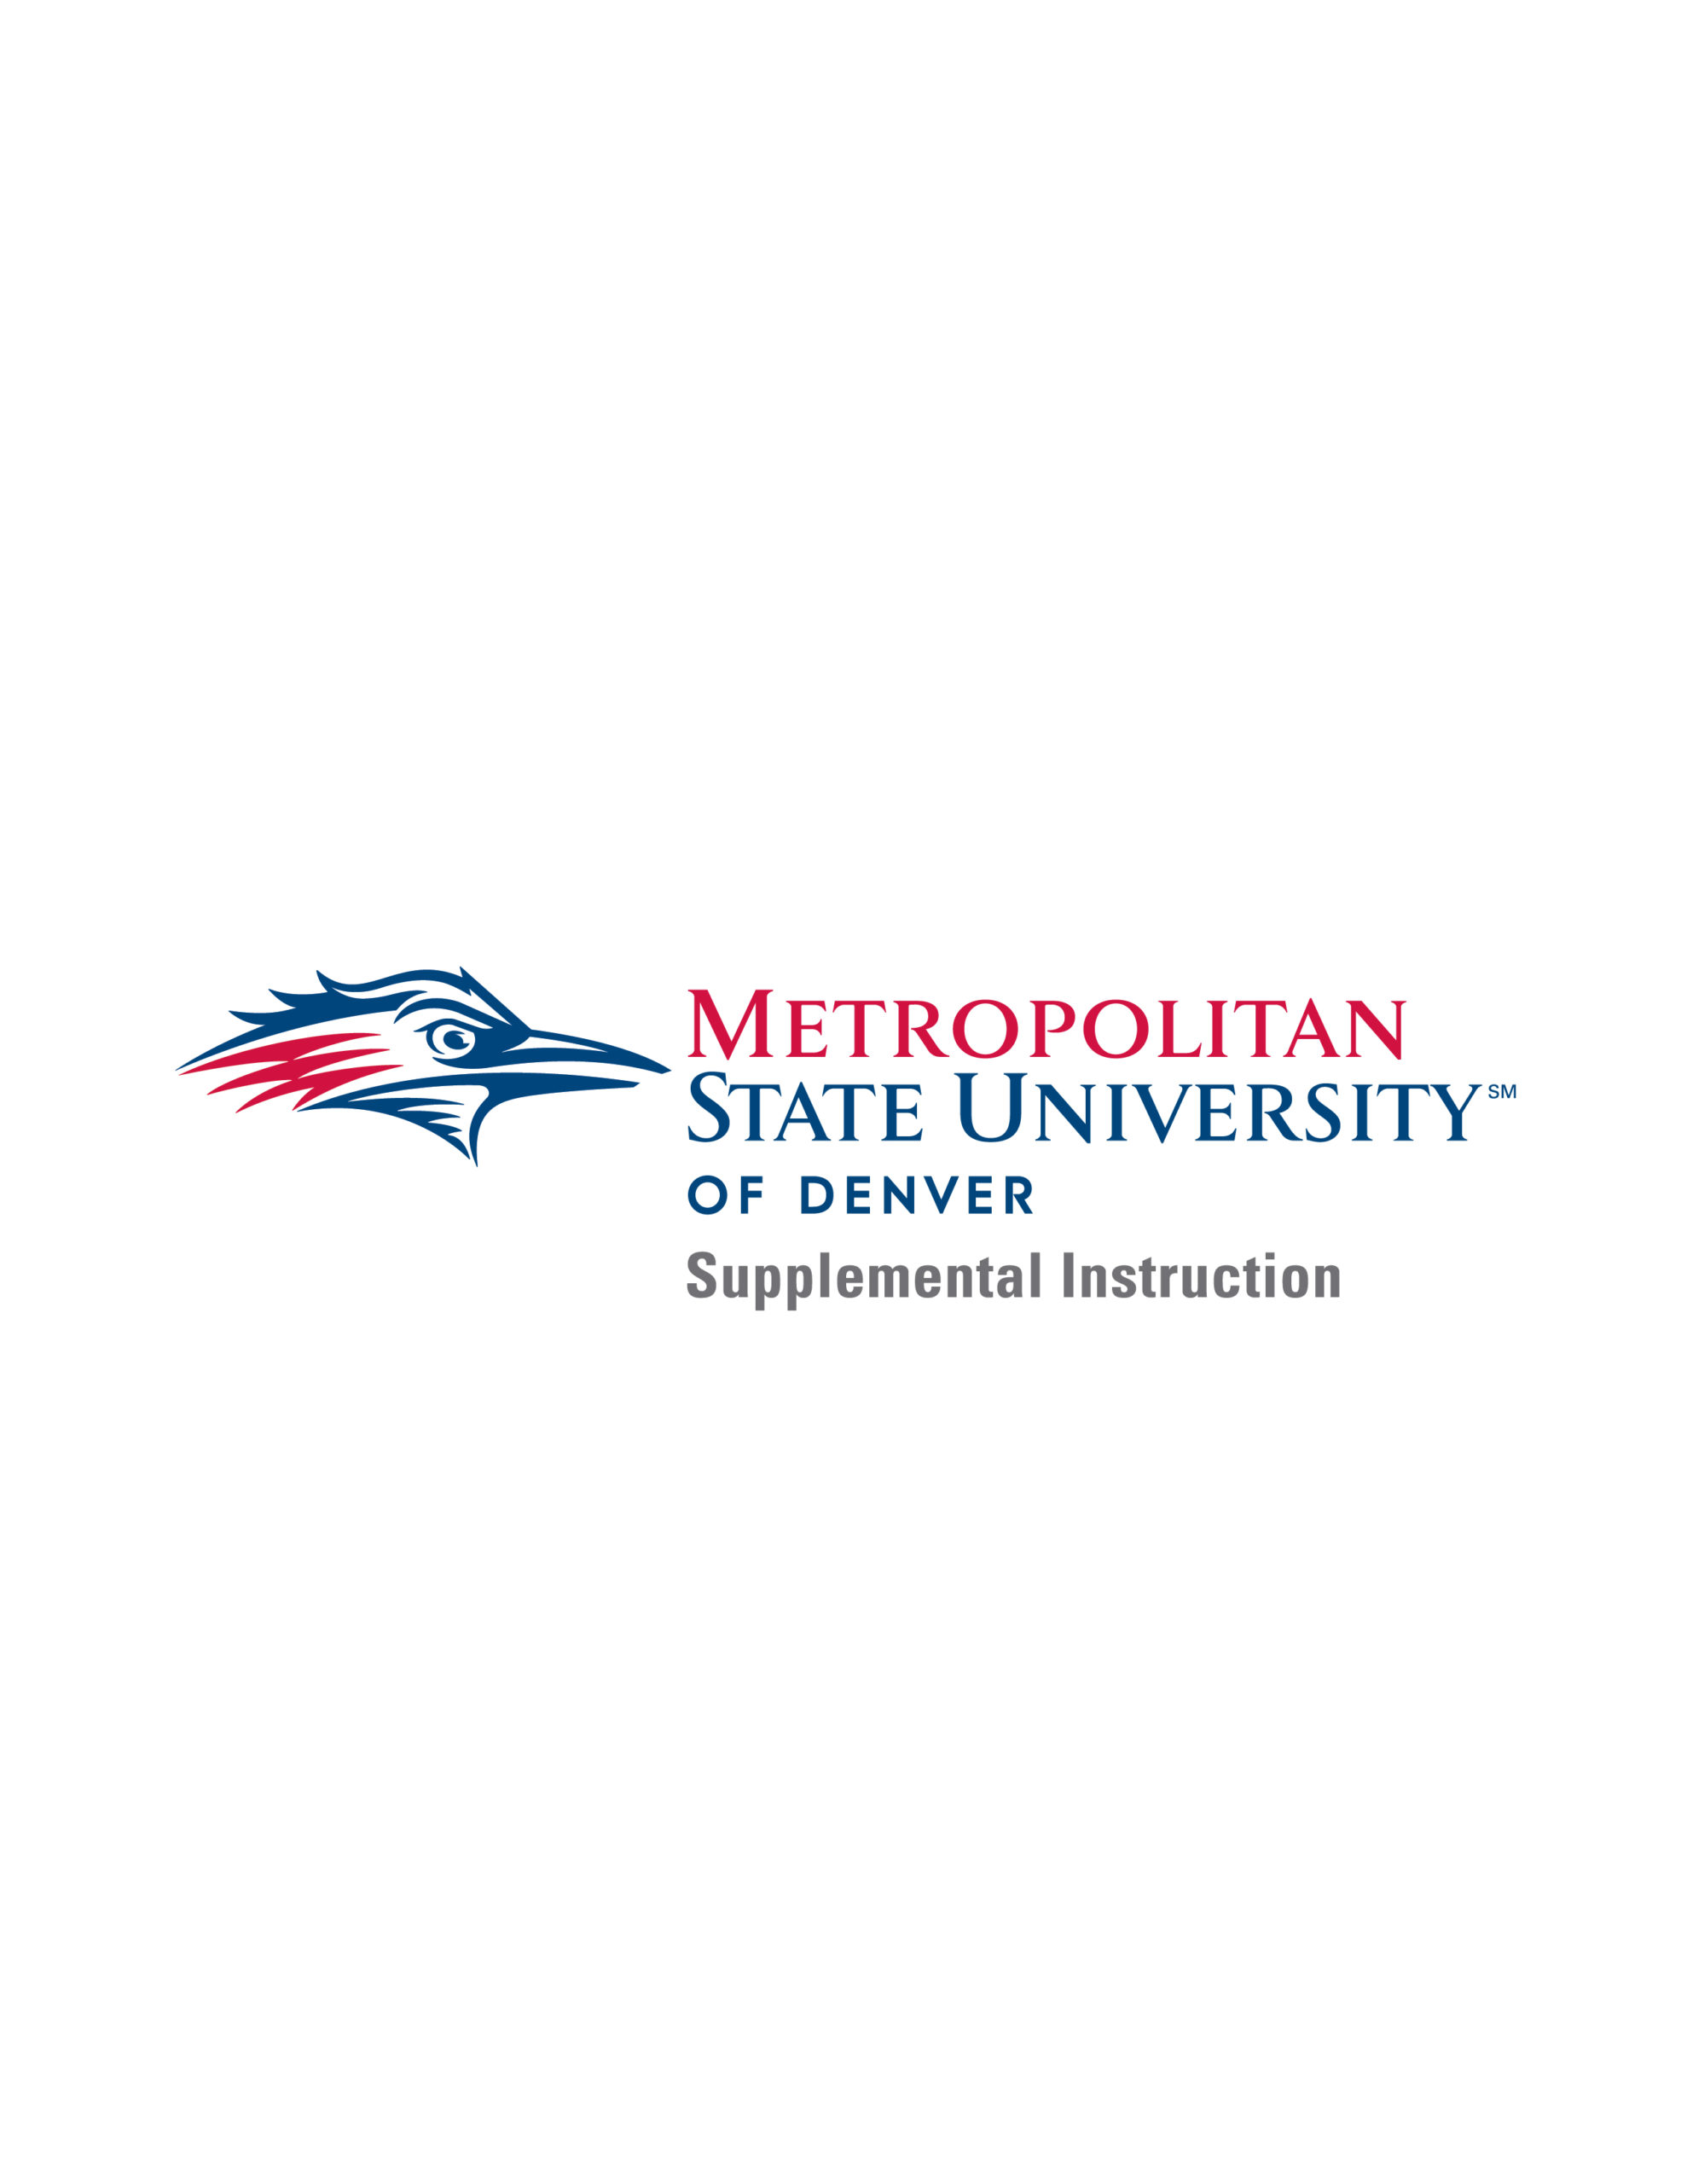 MSUDenver_Formal_SupplementalInstruction_3CPos_BlueRed_WhBkgd_FormatB_PAN